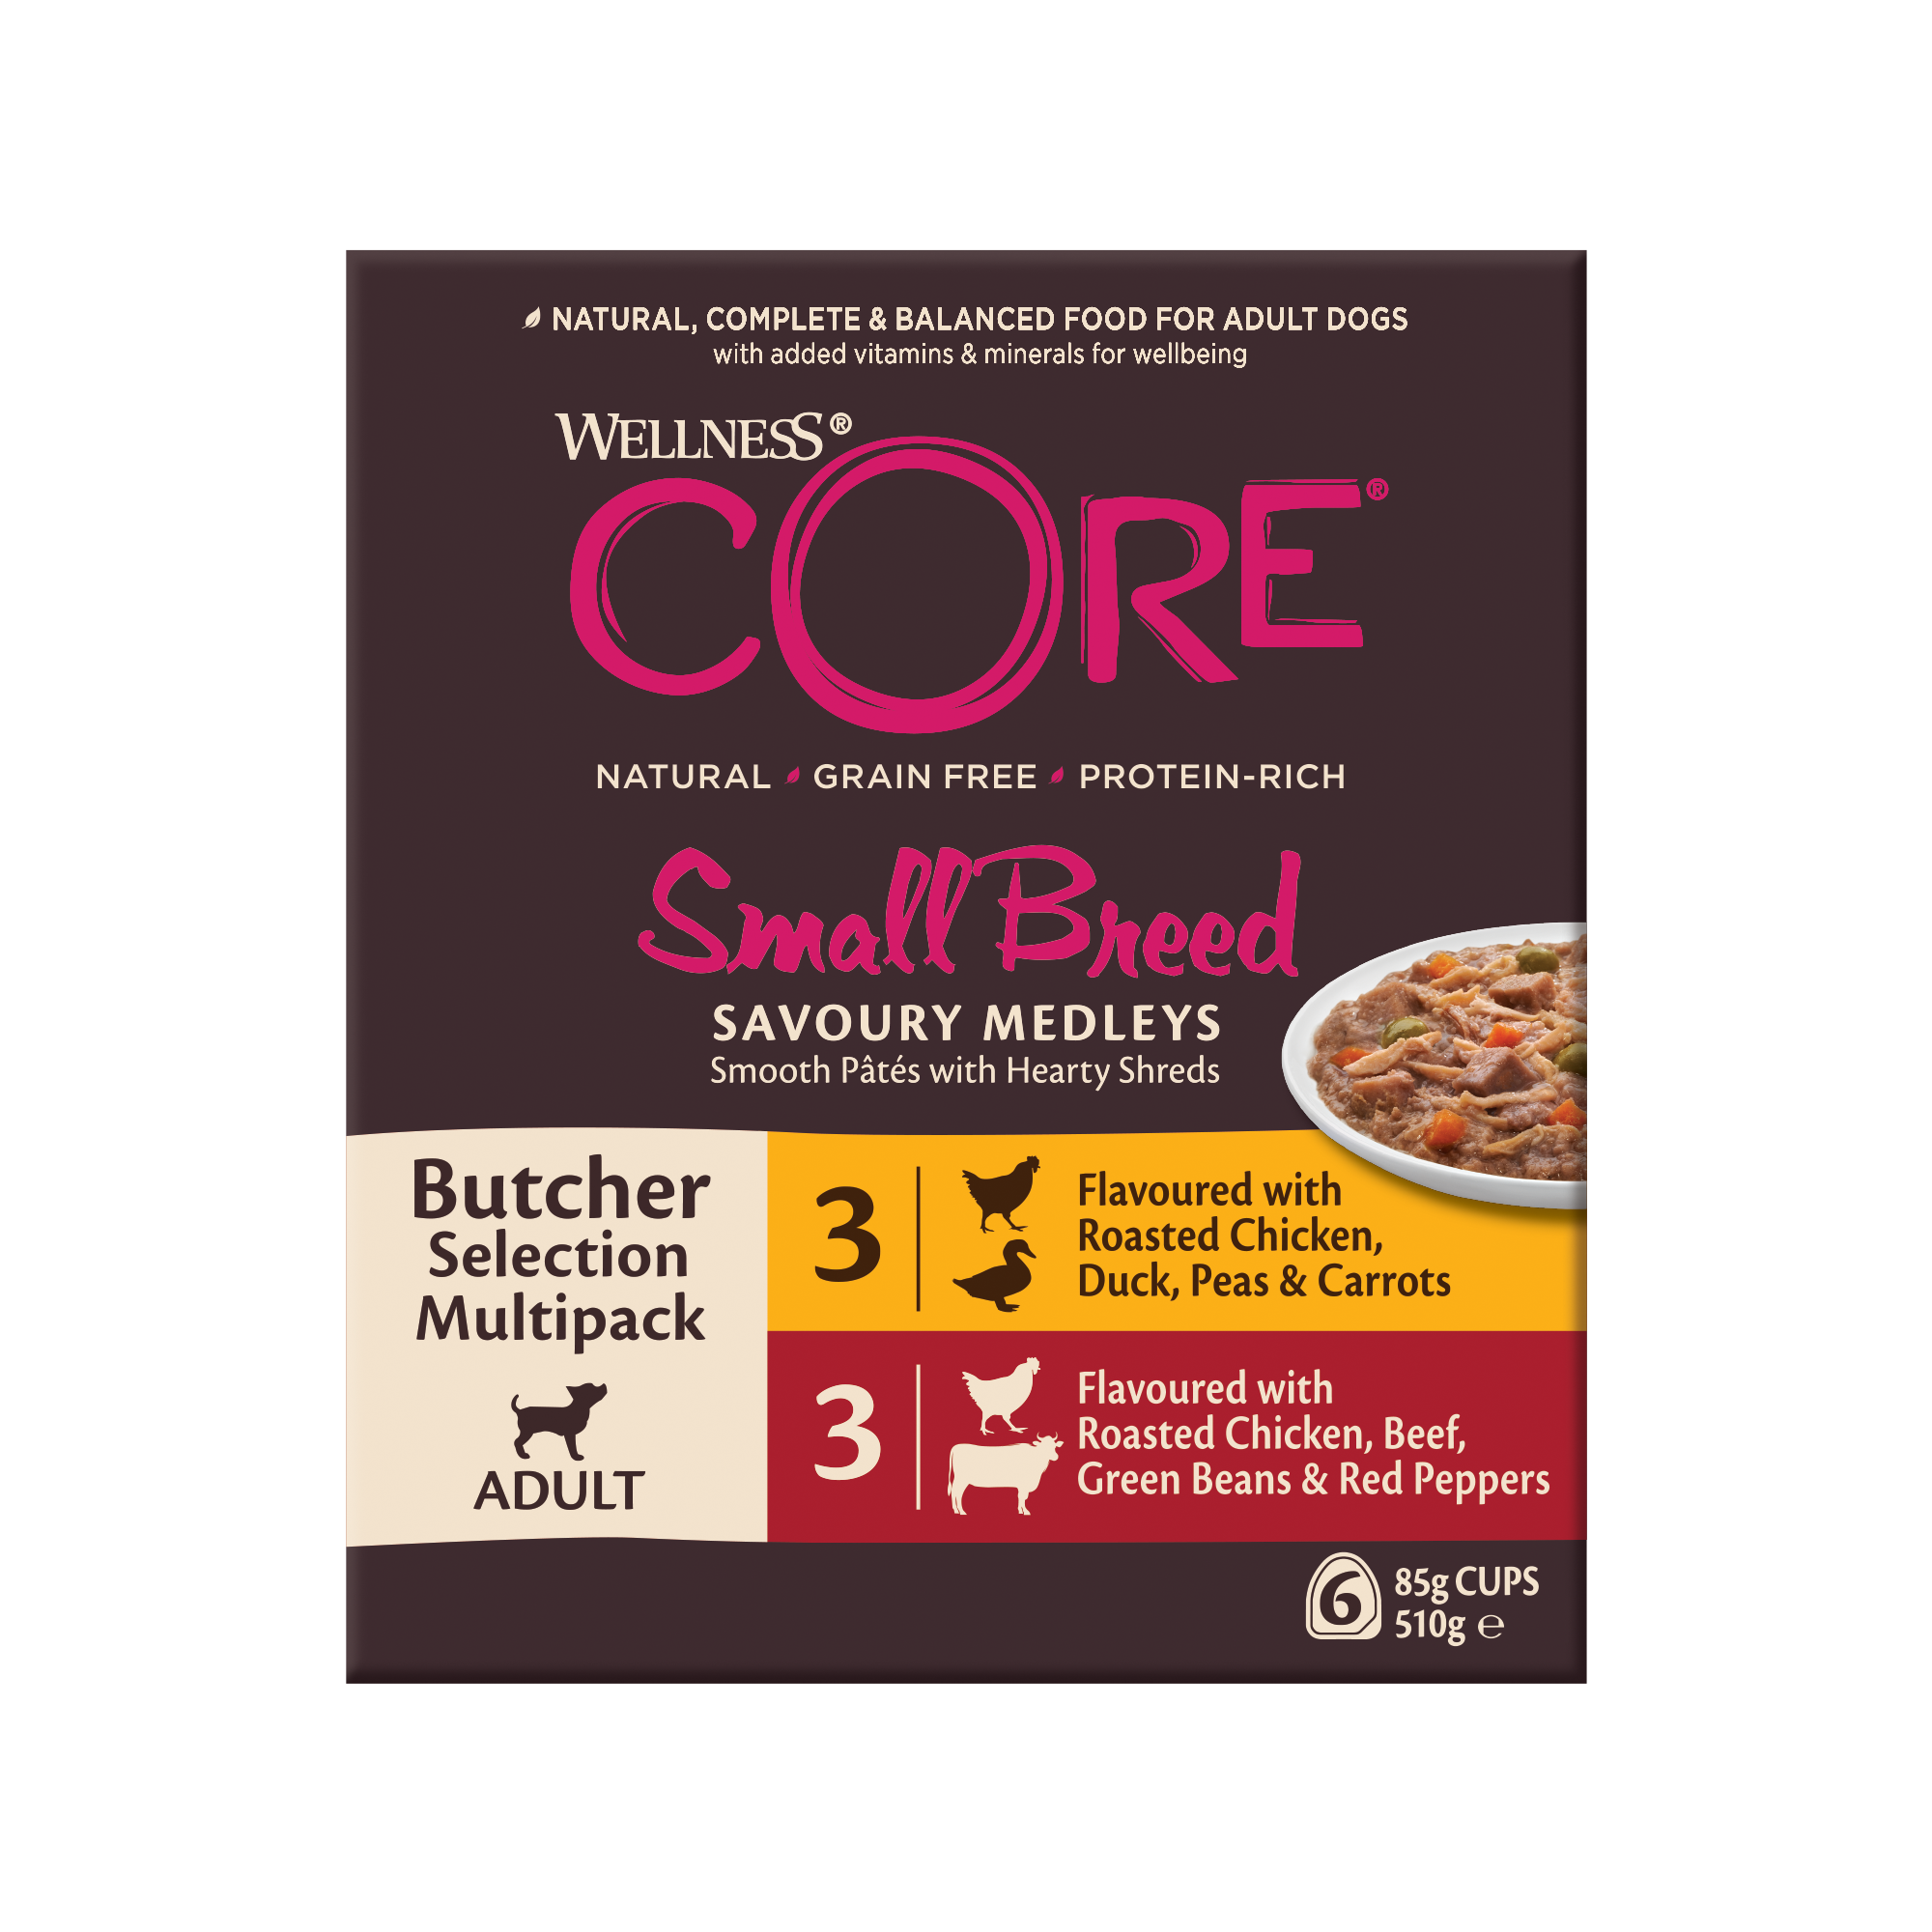 Wellness CORE Small Breed Savoury Medleys Butcher Selection Multipack ...